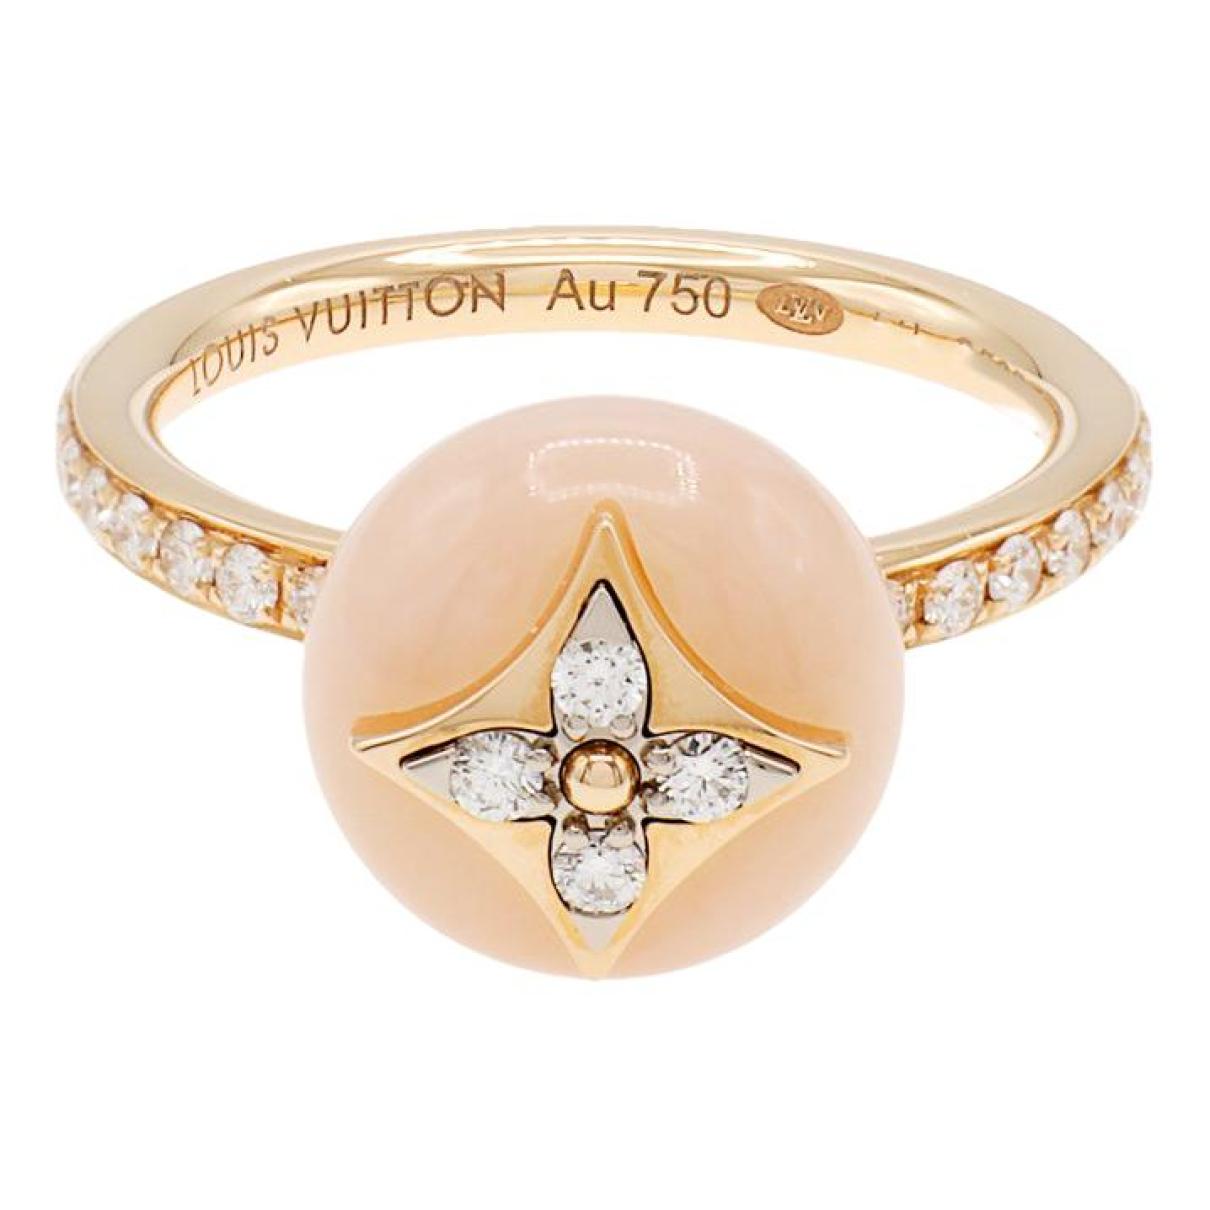 B Blossom rings from Louis Vuitton